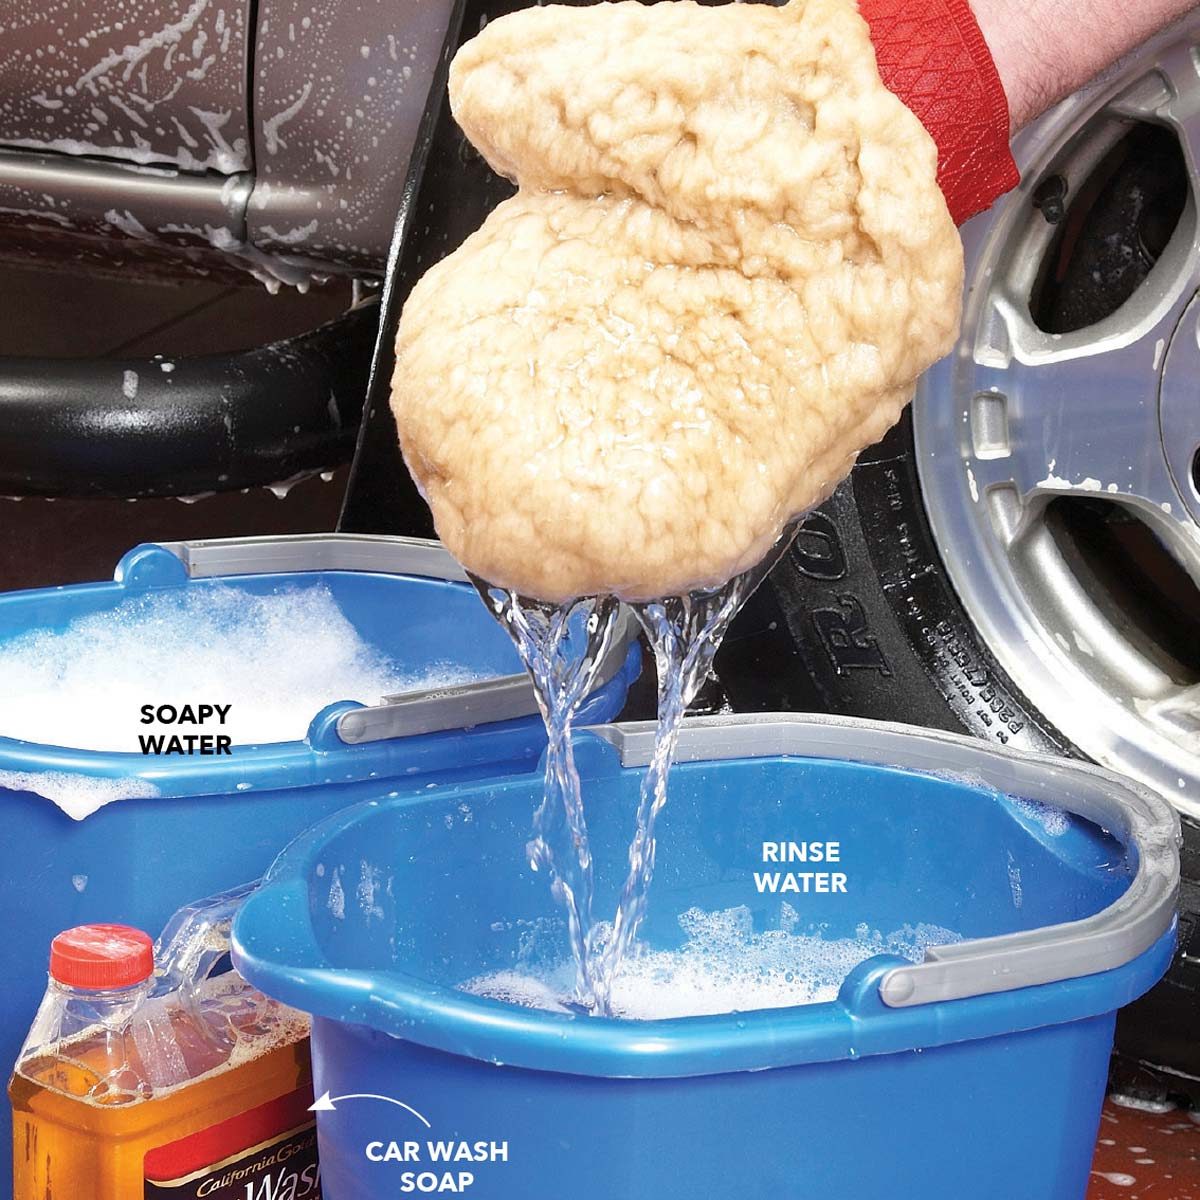 7 Car Cleaning Tips with Stuff You Already Have